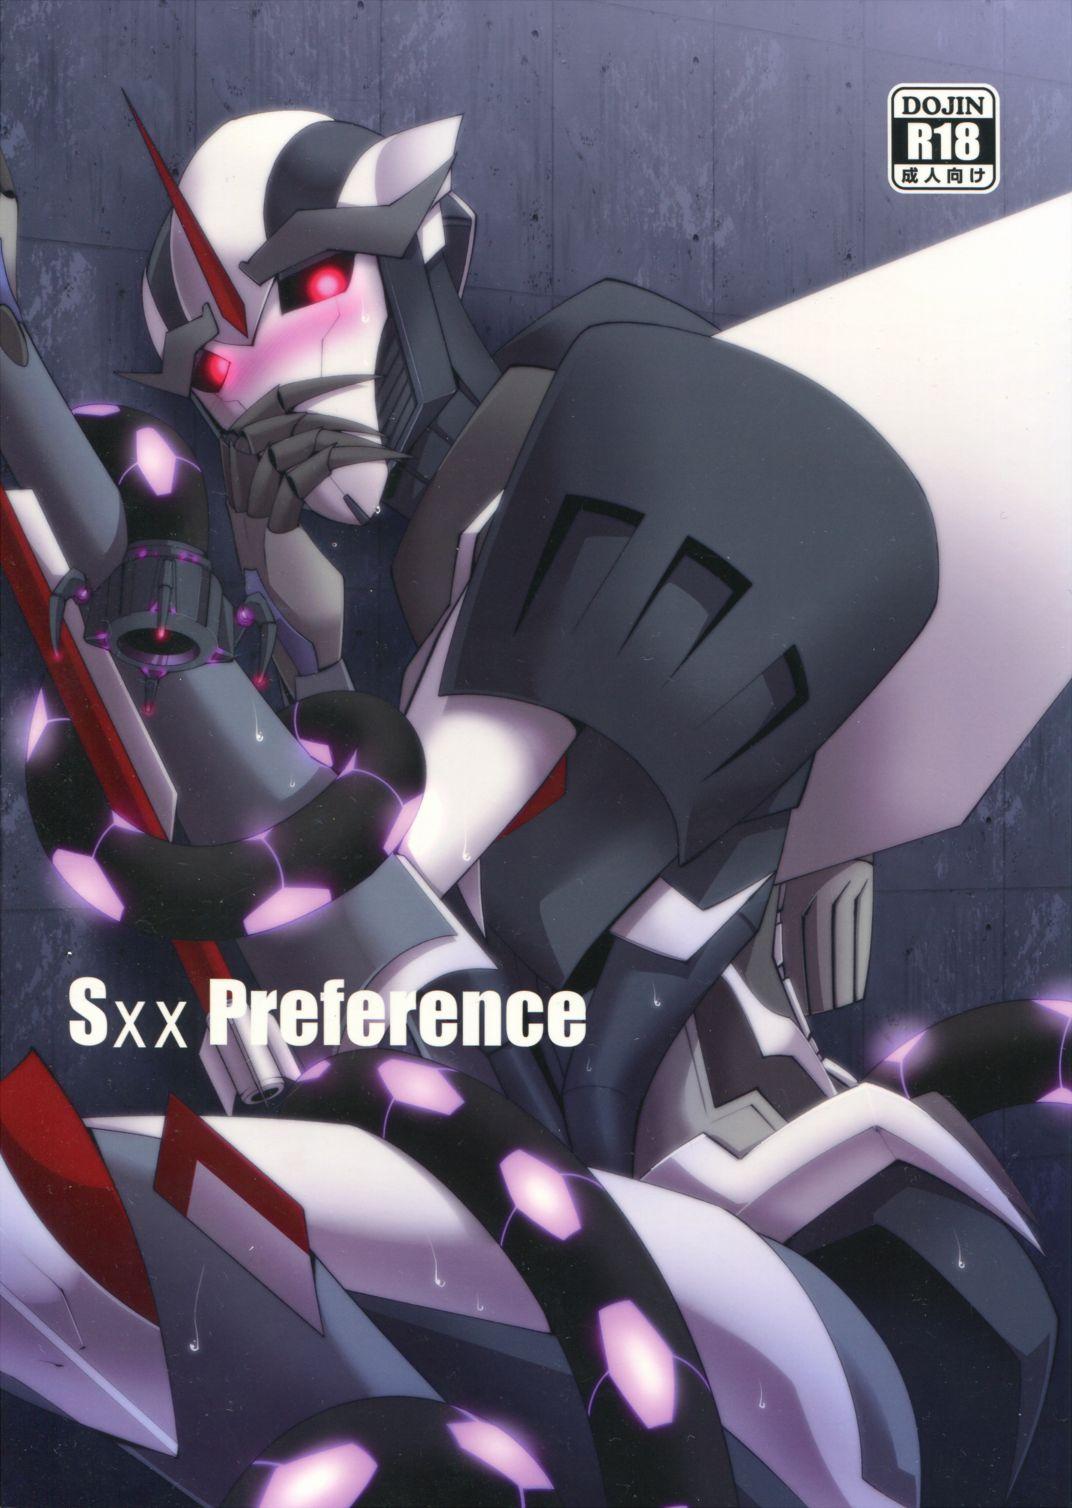 Hot Sxx Preference - Transformers Picked Up - Picture 1